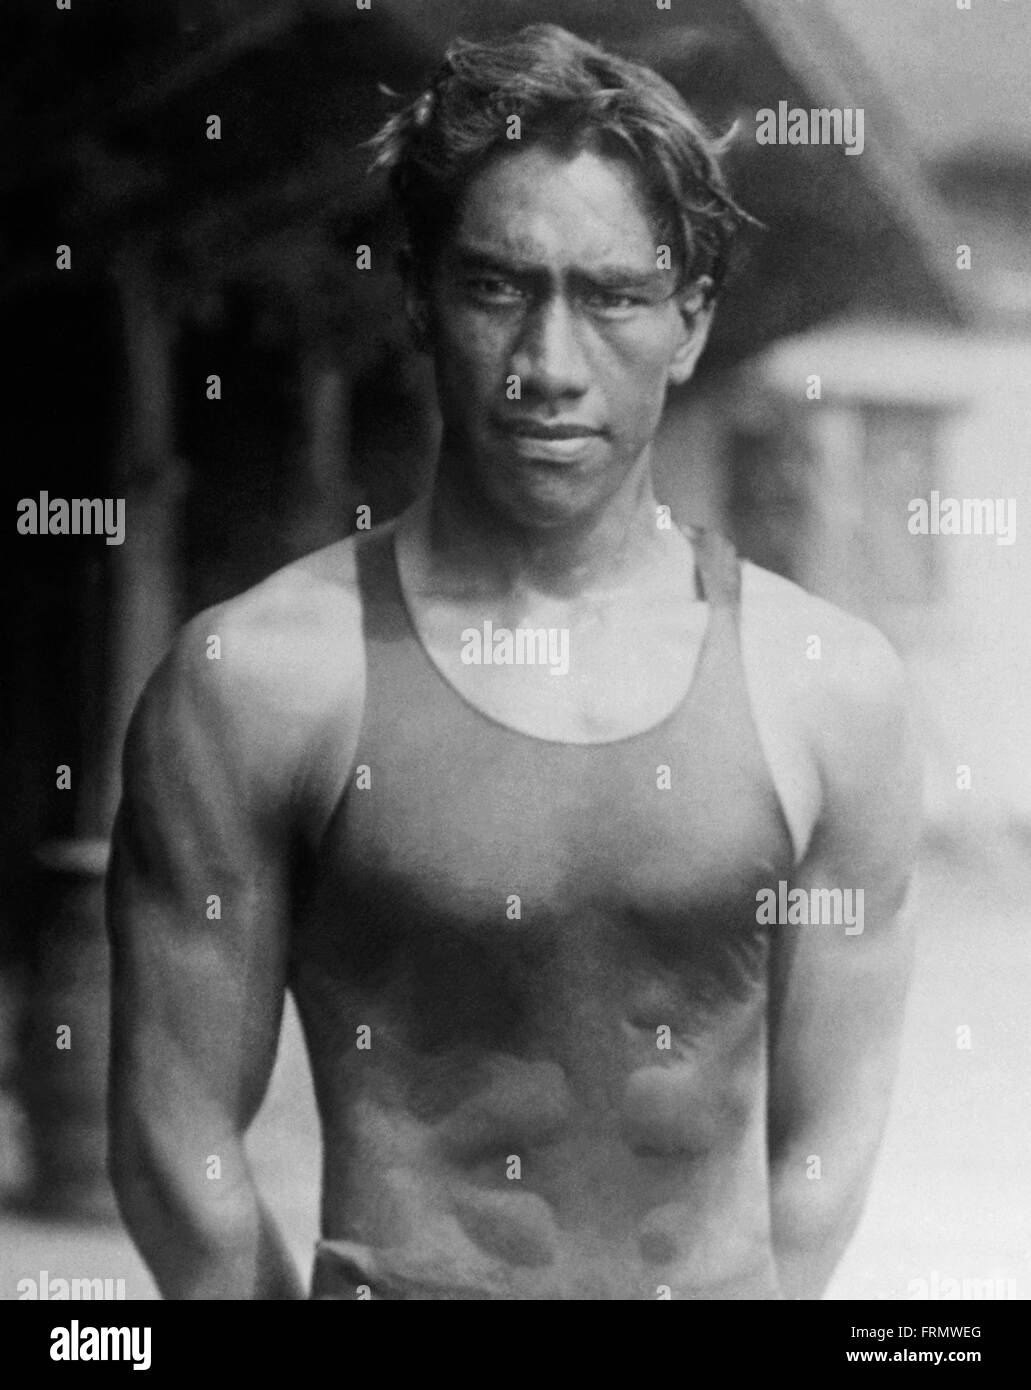 Duke Kahanamoku, the legendary 'father of modern surfing' and a multi-Olympic medalist is honored in the the Surfing Hall of Fame, the Swimming Hall of Fame and the Olympic Hall of Fame. Stock Photo